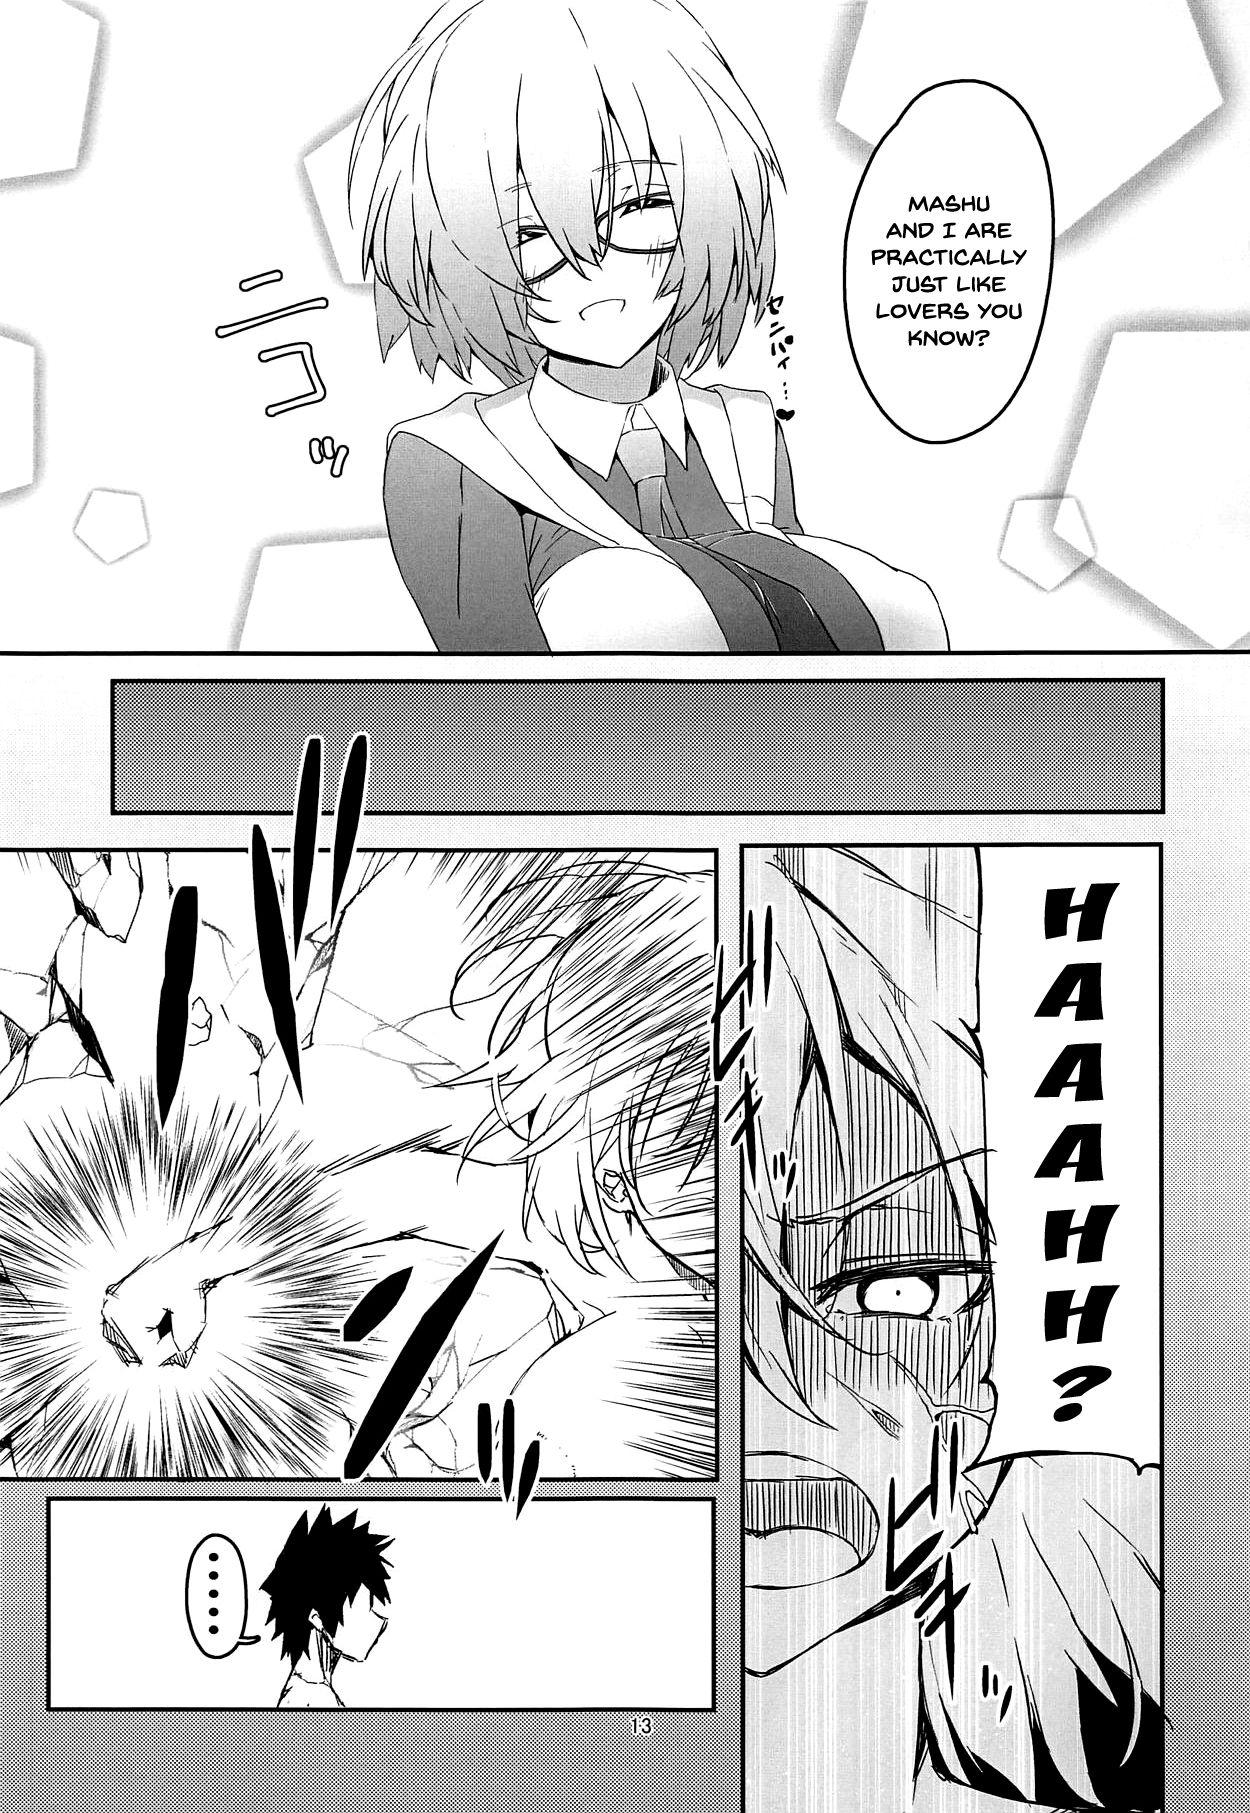 Piercing Uchi no Alter wa Choroi | Our Alter Is So Easy - Fate grand order Amateurs Gone - Page 11